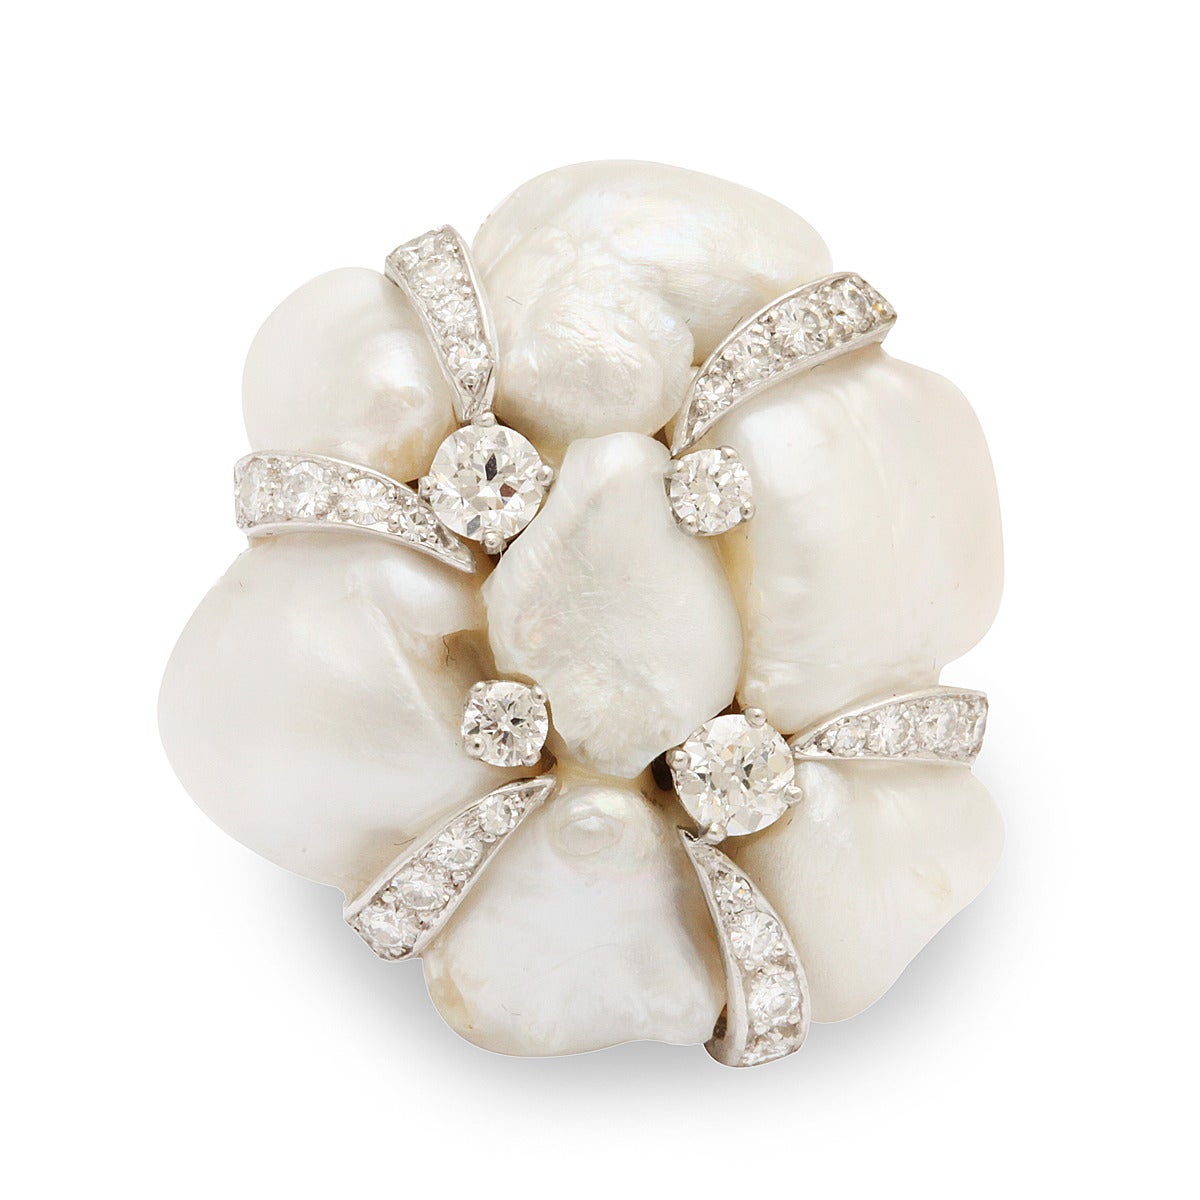 Vintage natural baroque pearl clasp set in platinum with diamonds. Contemporary mount converts it into a ring. Jeweler to the stars, William Ruser, was renowned for his monumental and fantastical pearl creations.